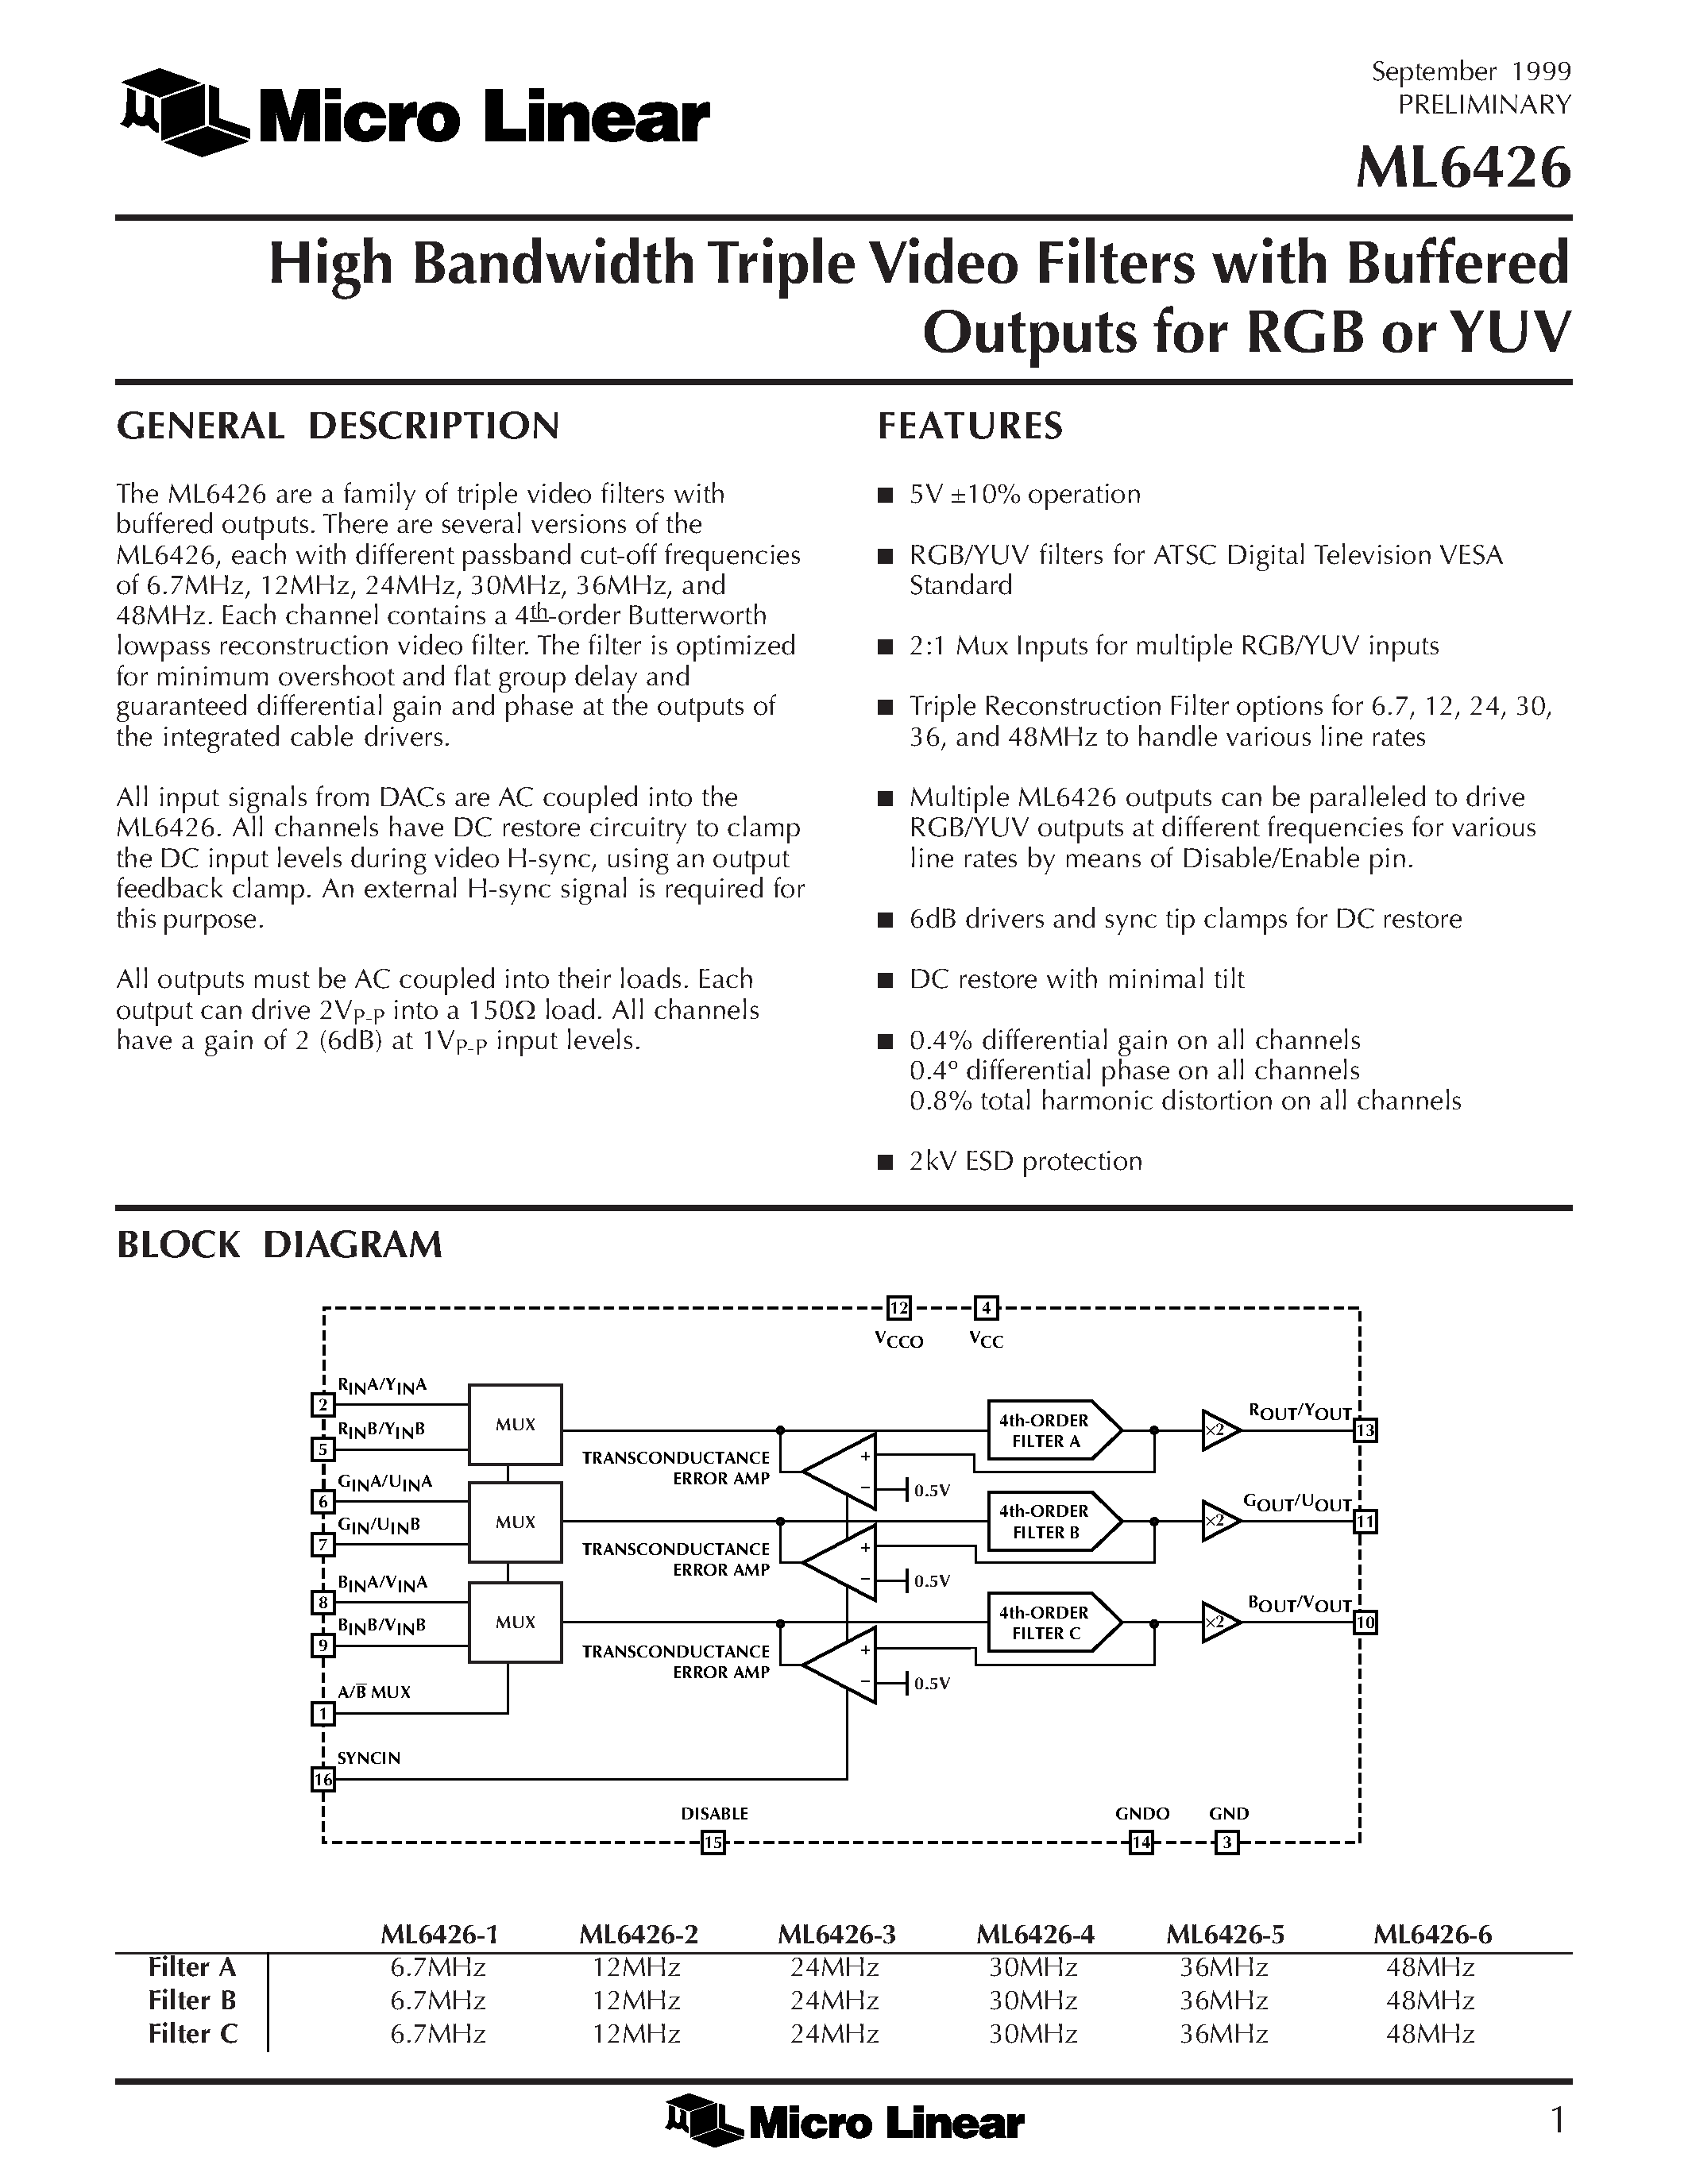 Datasheet ML6426CS-6 - High Bandwidth Triple Video Filters with Buffered Outputs for RGB or YUV page 1